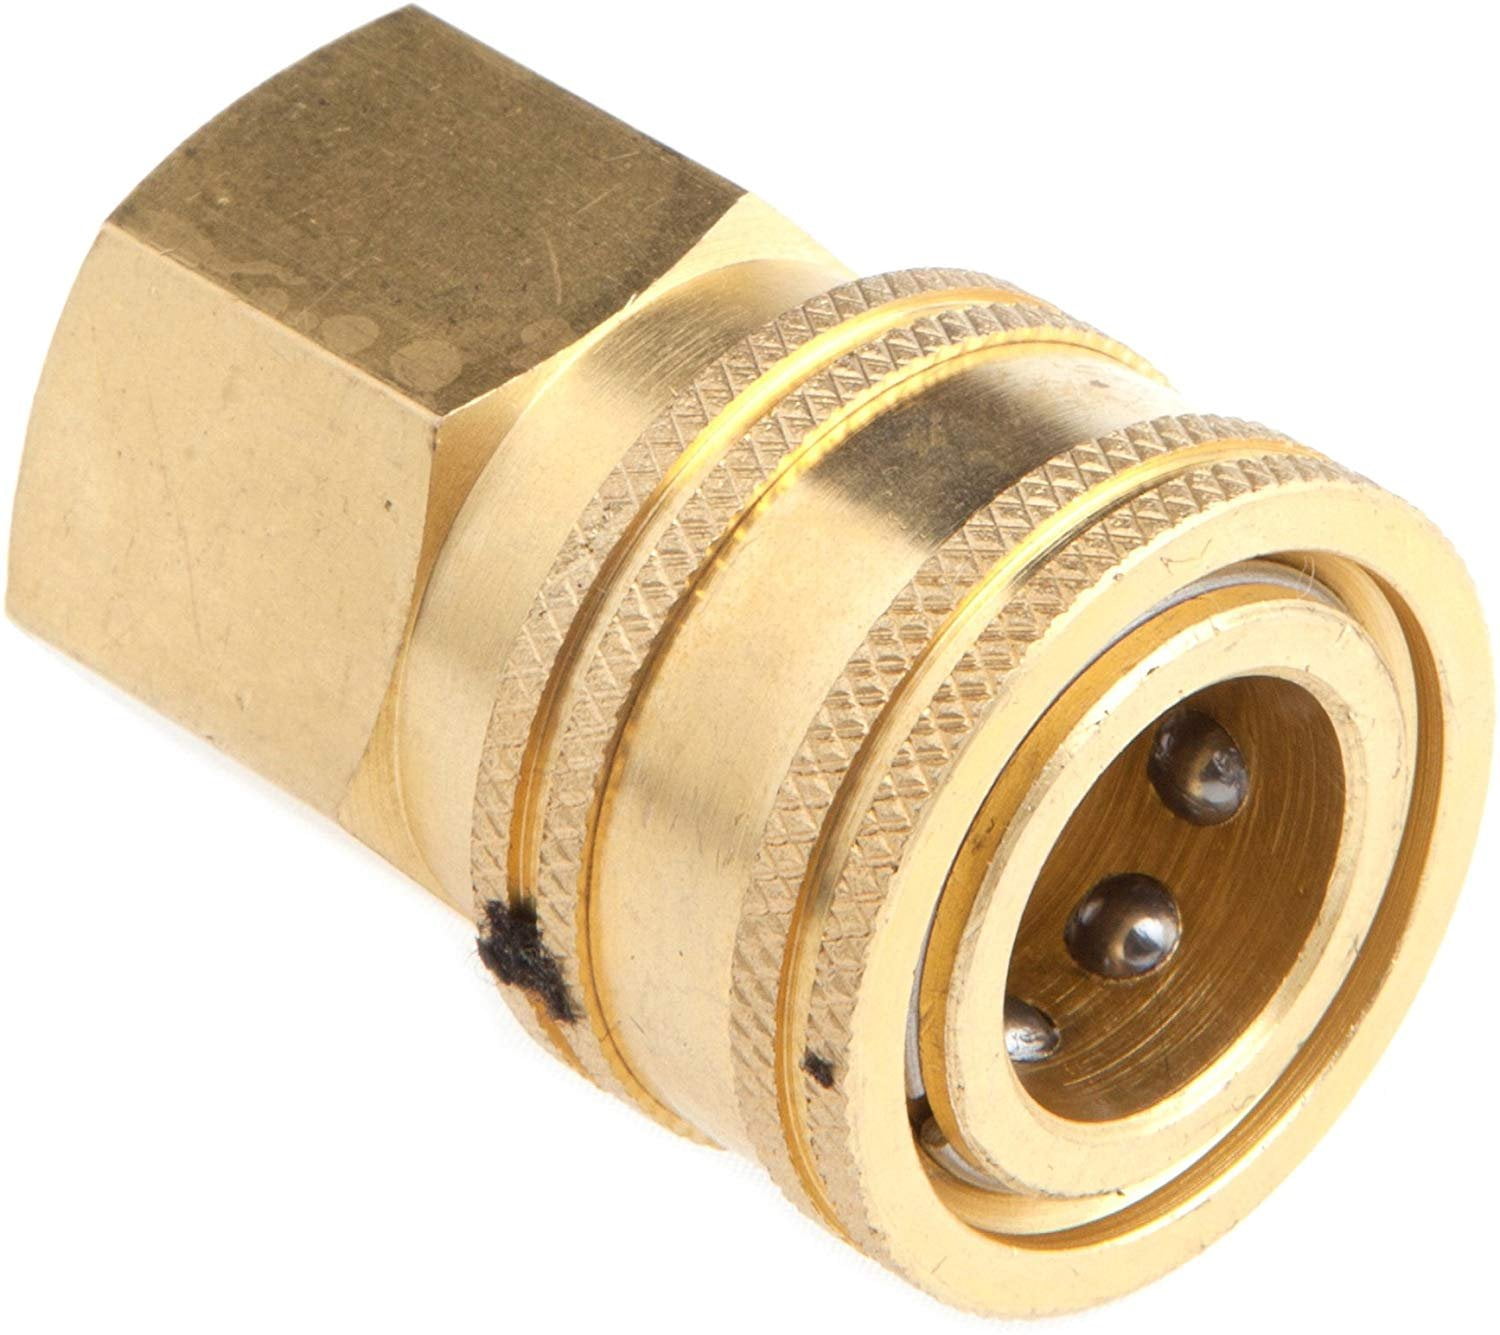 Pressure Washer  Quick Connect Coupler 3/8" Female  5500 psi BRASS  New 